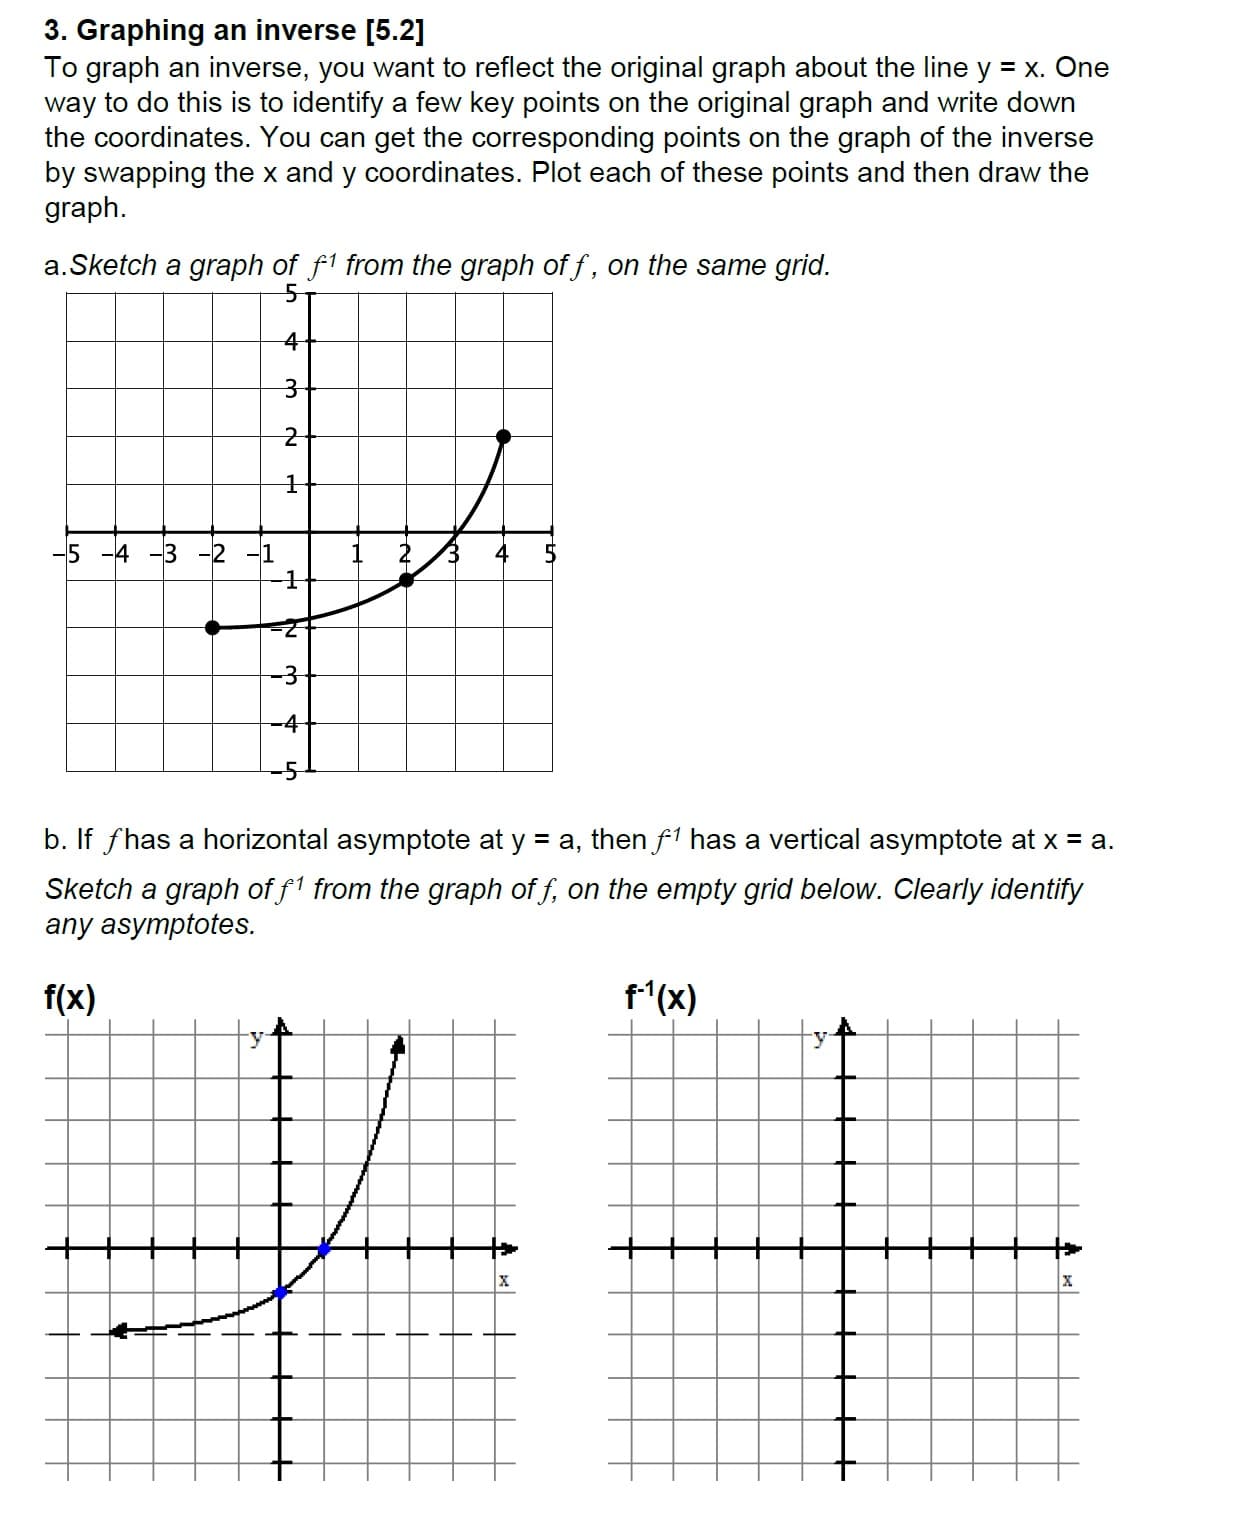 3. Graphing an inverse [5.2]
To graph an inverse, you want to reflect the original graph about the line y x. One
way to do this is to identify a few key points on the original graph and write down
the coordinates. You can get the corresponding points on the graph of the inverse
by swapping the x and y coordinates. Plot each of these points and then draw the
graph.
a.Sketch a graph of f1 from the graph of f, on the same grid.
43 2 ,
-3
-51
b. If fhas a horizontal asymptote at y - a, then f1 has a vertical asymptote at x- a
Sketch a graph off1 from the graph of f, on the empty grid below. Clearly identify
any asymptotes.
f(x)
f-1(x)
